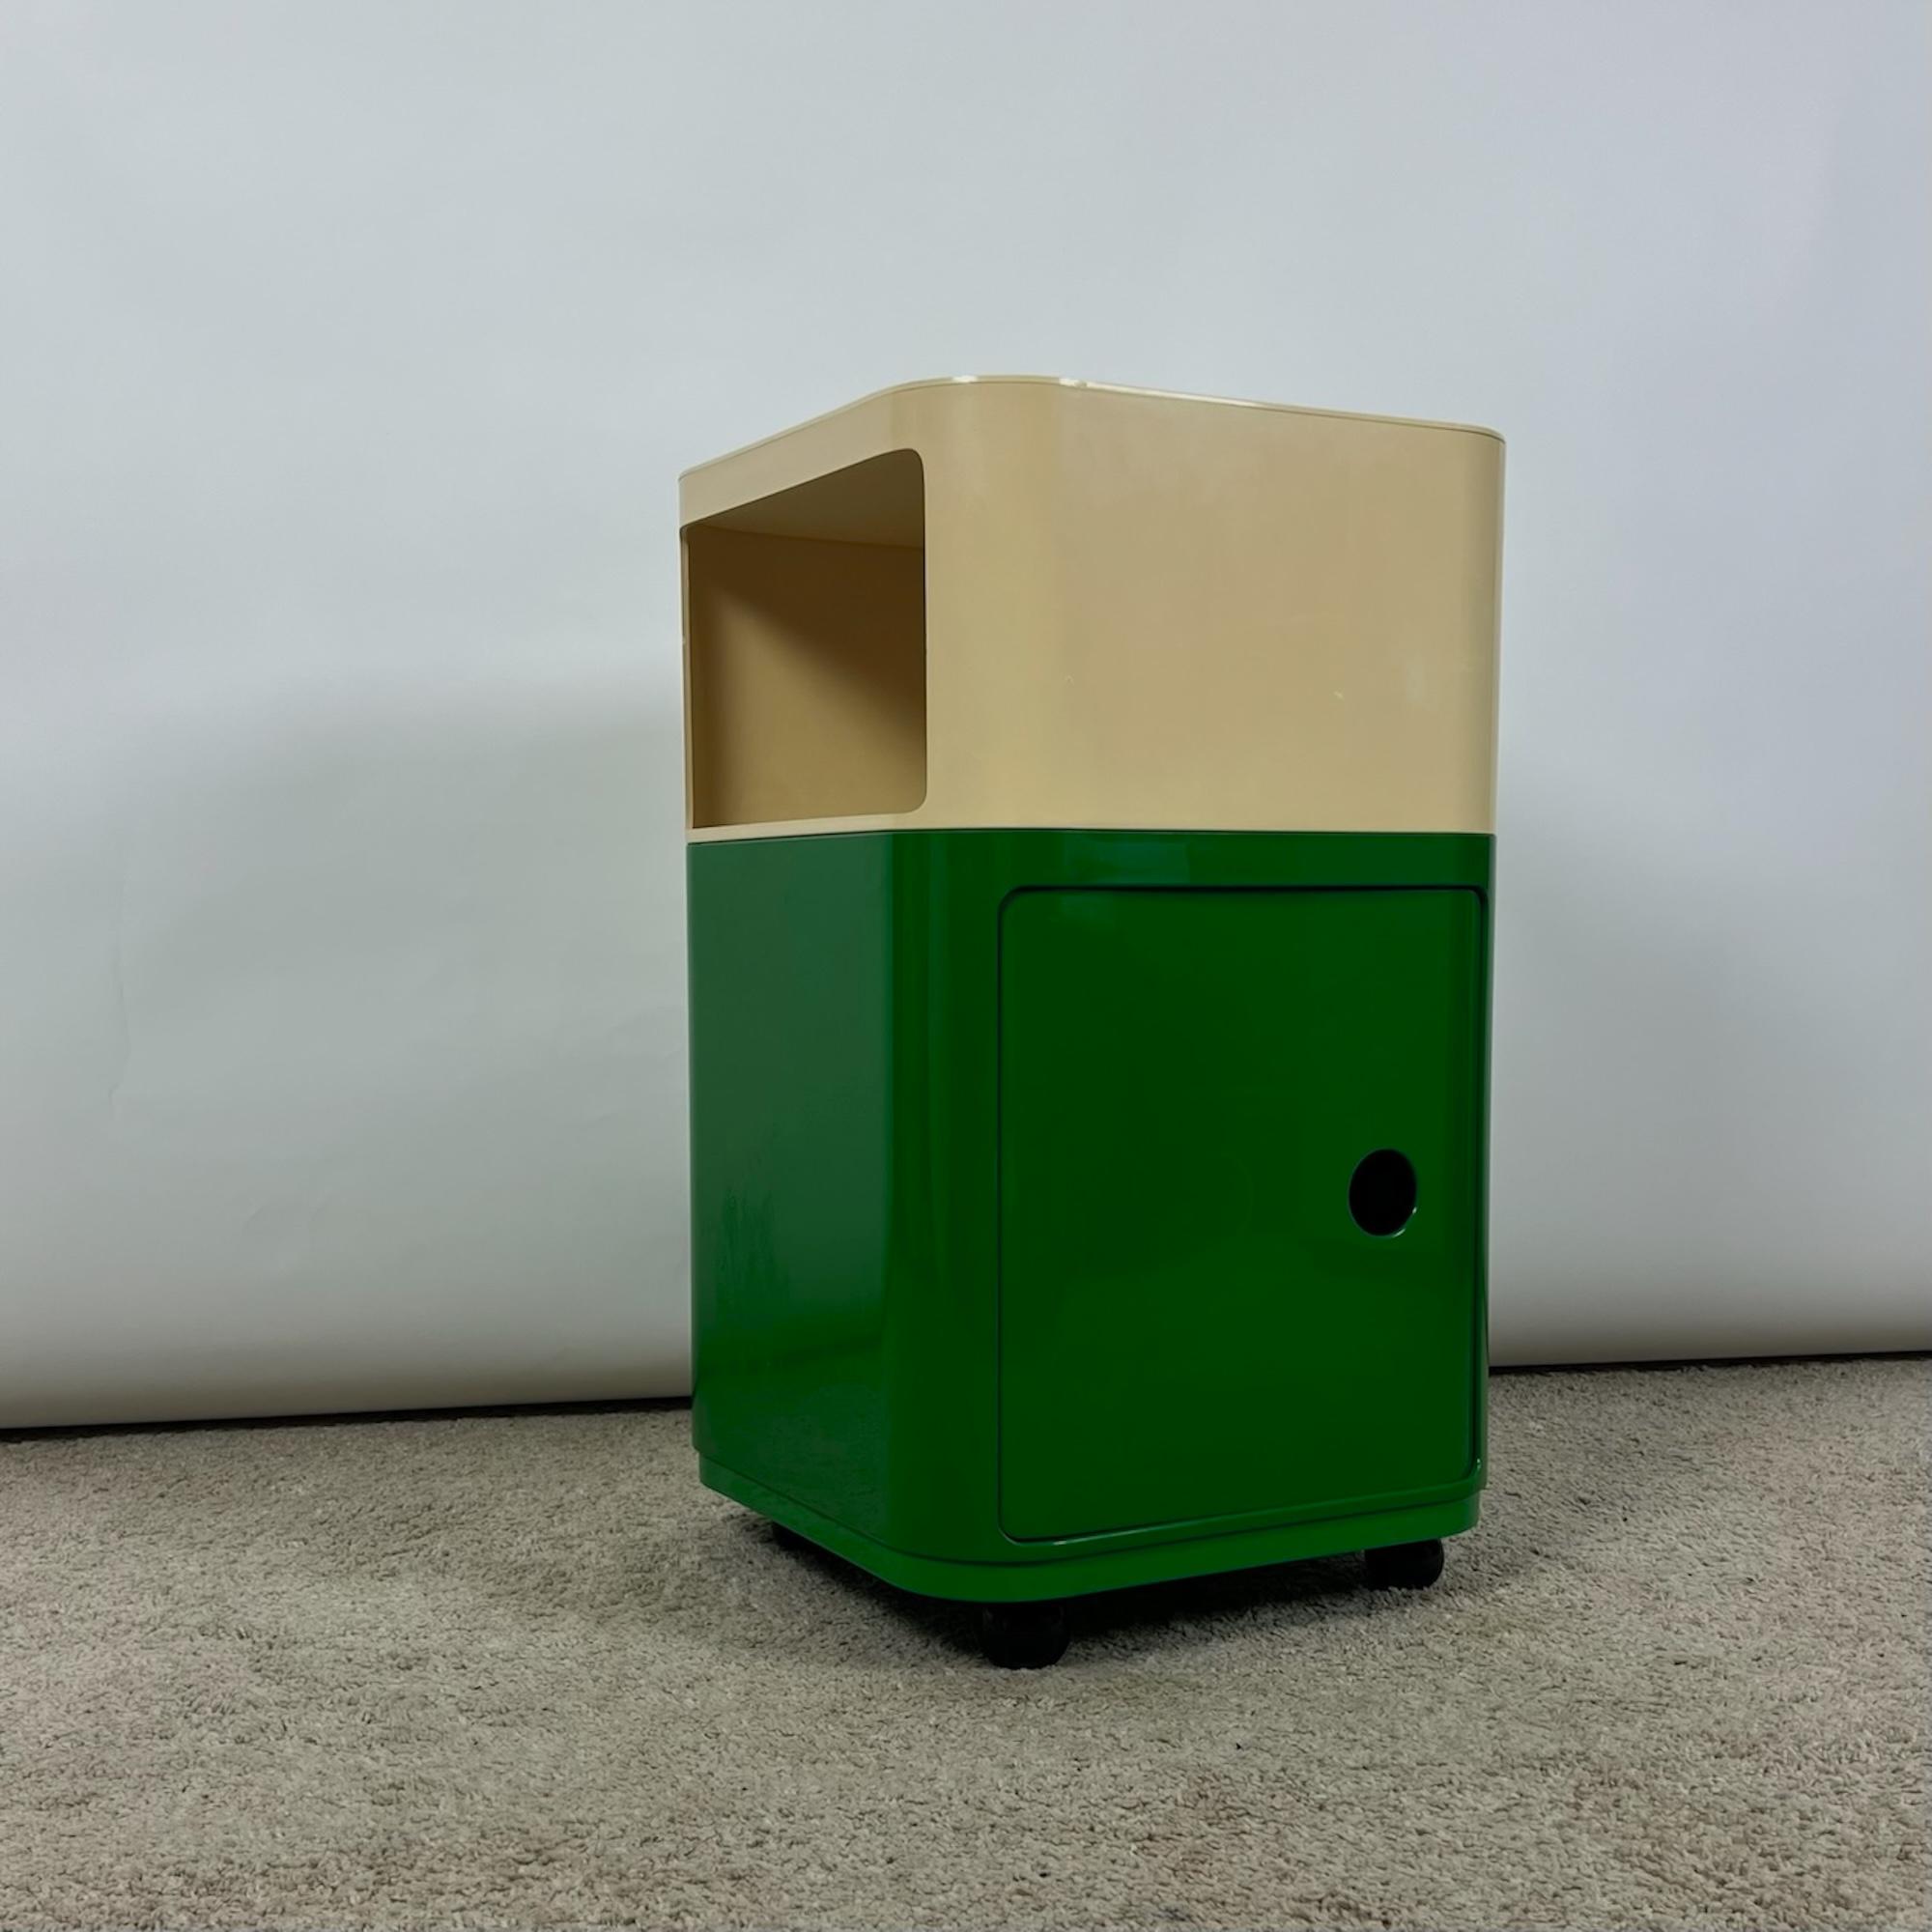 Kartell 'Componibili' Square Based Cabinet Modules in green and white, 1960s In Good Condition For Sale In San Benedetto Del Tronto, IT